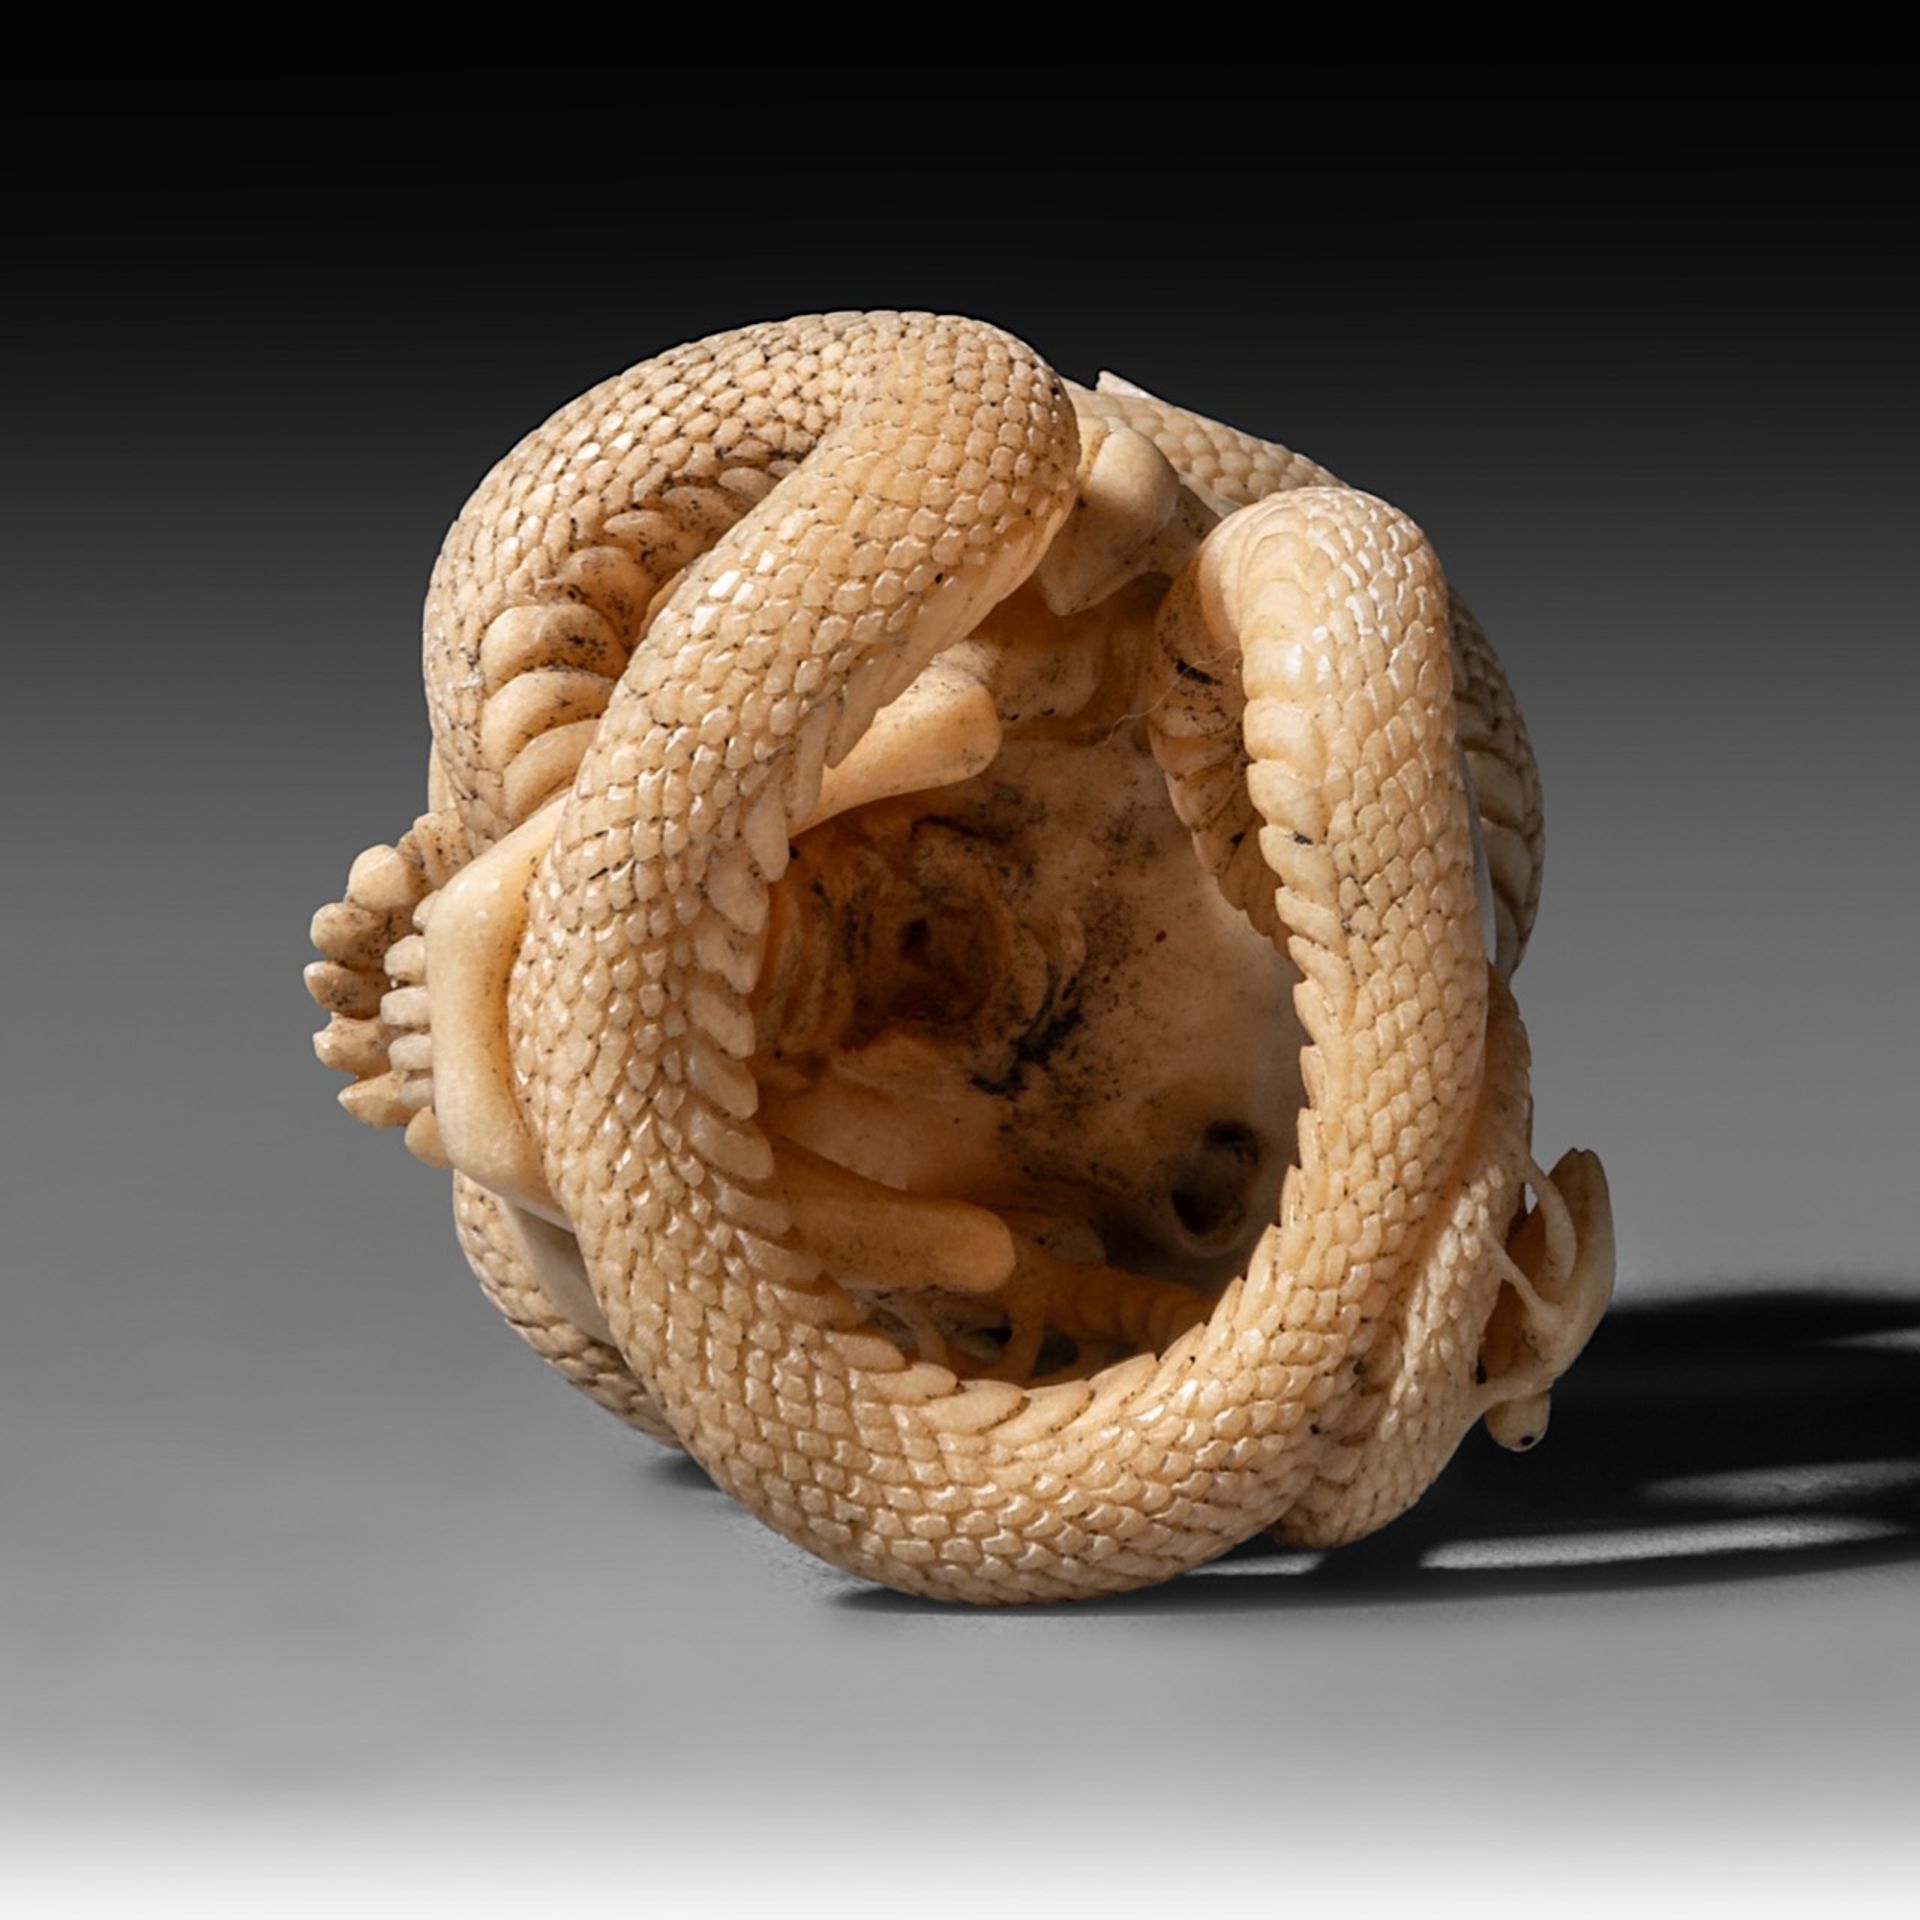 A (German) skull and snake sculpture, bone, 18th - 19th century, H 7,9 cm - weight 79 g - Image 9 of 9